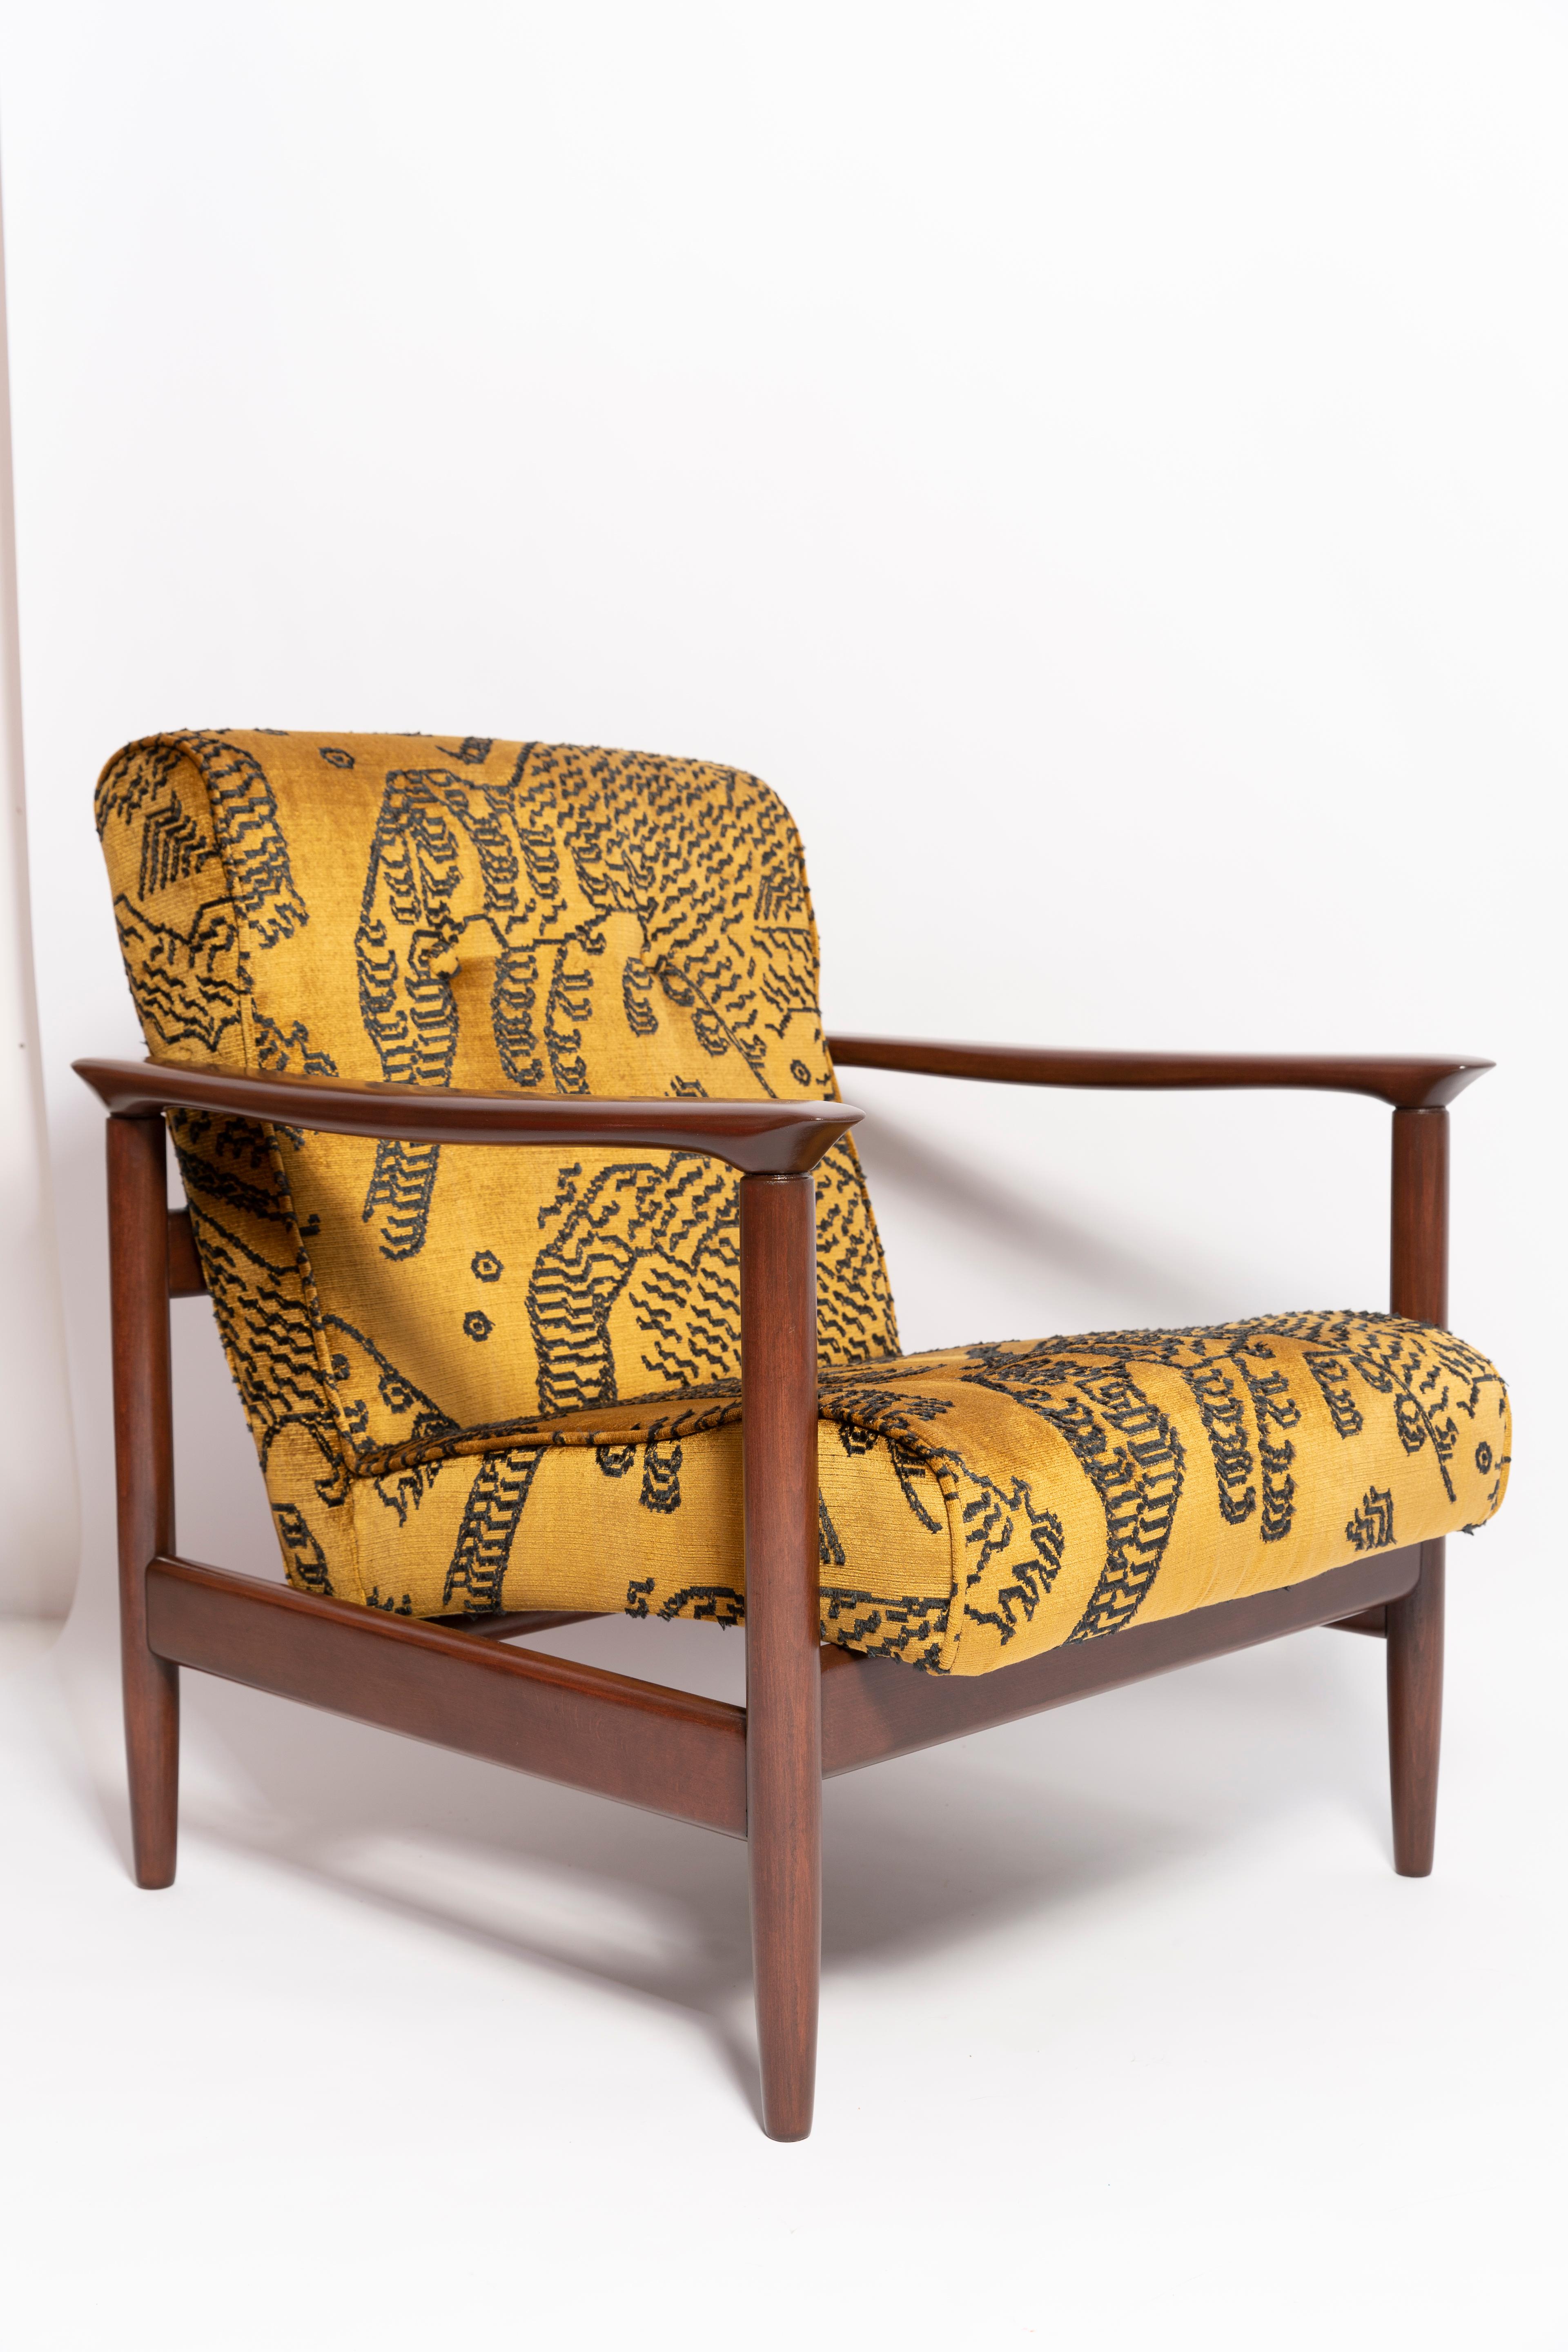 Beautiful armchair GFM-142, designed by Edmund Homa, a polish architect, designer of Industrial Design and interior architecture, professor at the Academy of Fine Arts in Gdansk, Poland.

The armchair was made in the 1960s in the Gosciecinska